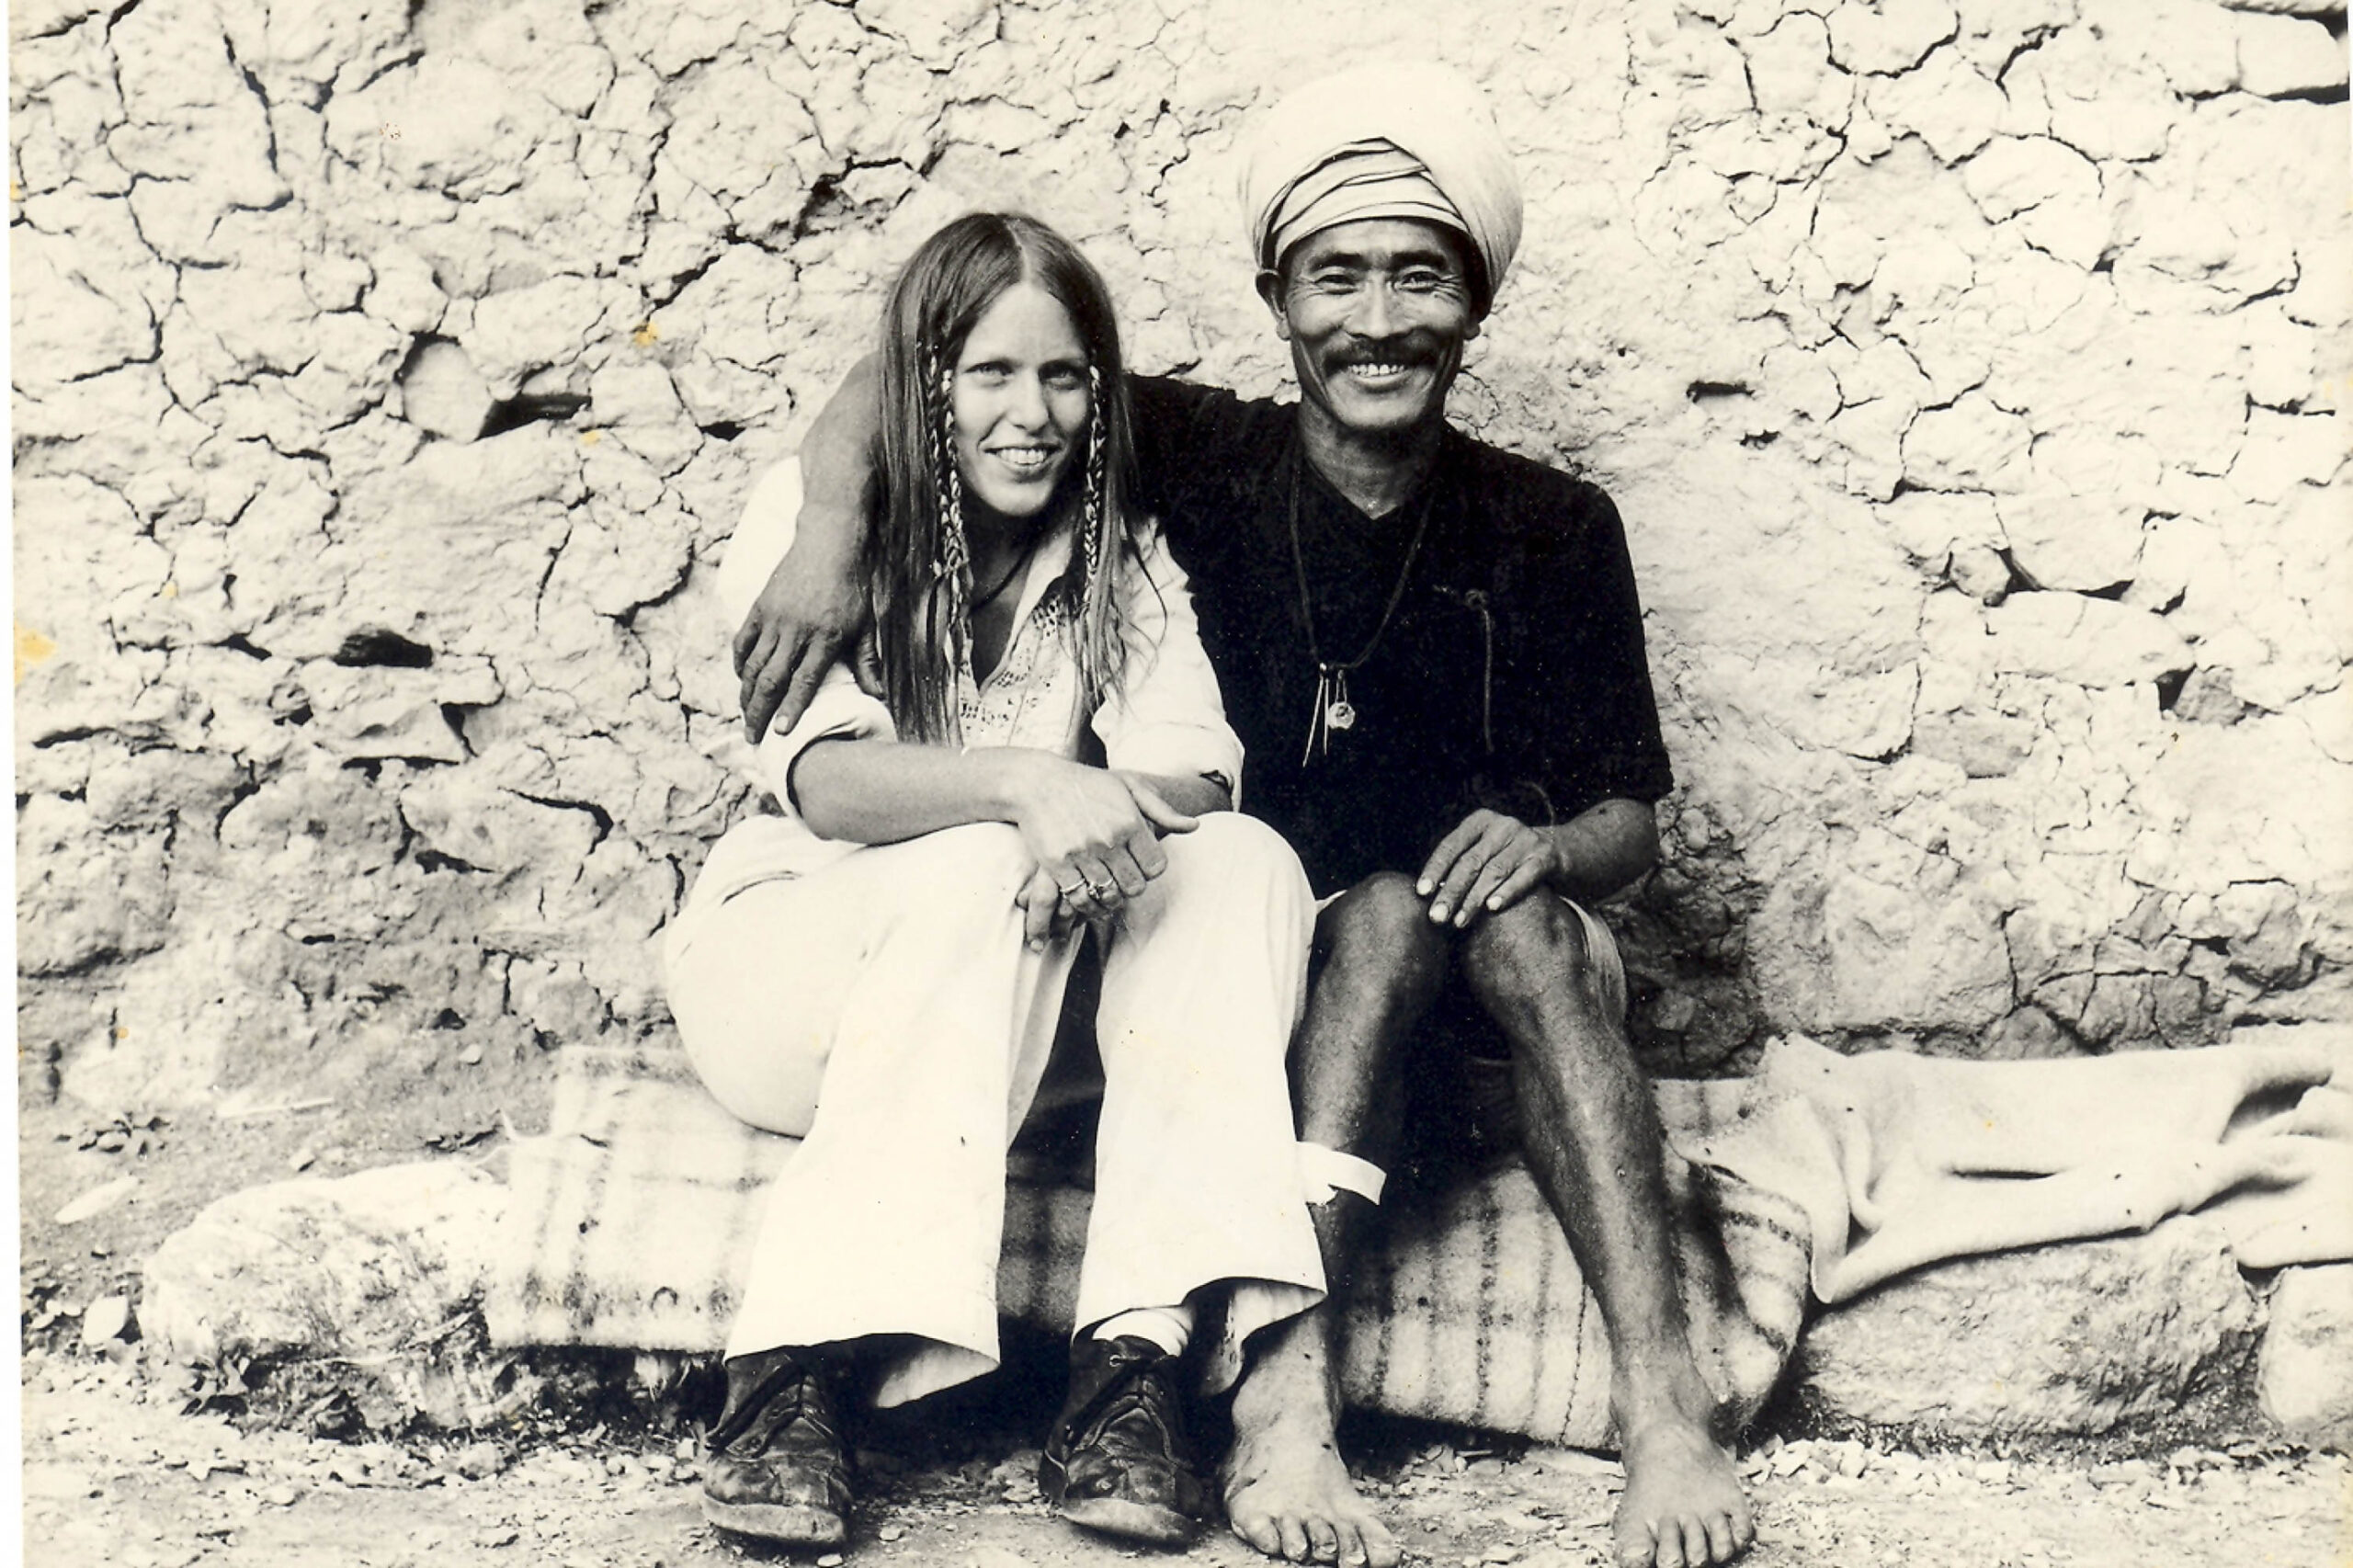 B.B. with a head shaman in a remote village of Nepal. Image courtesy of BB St. Roman.